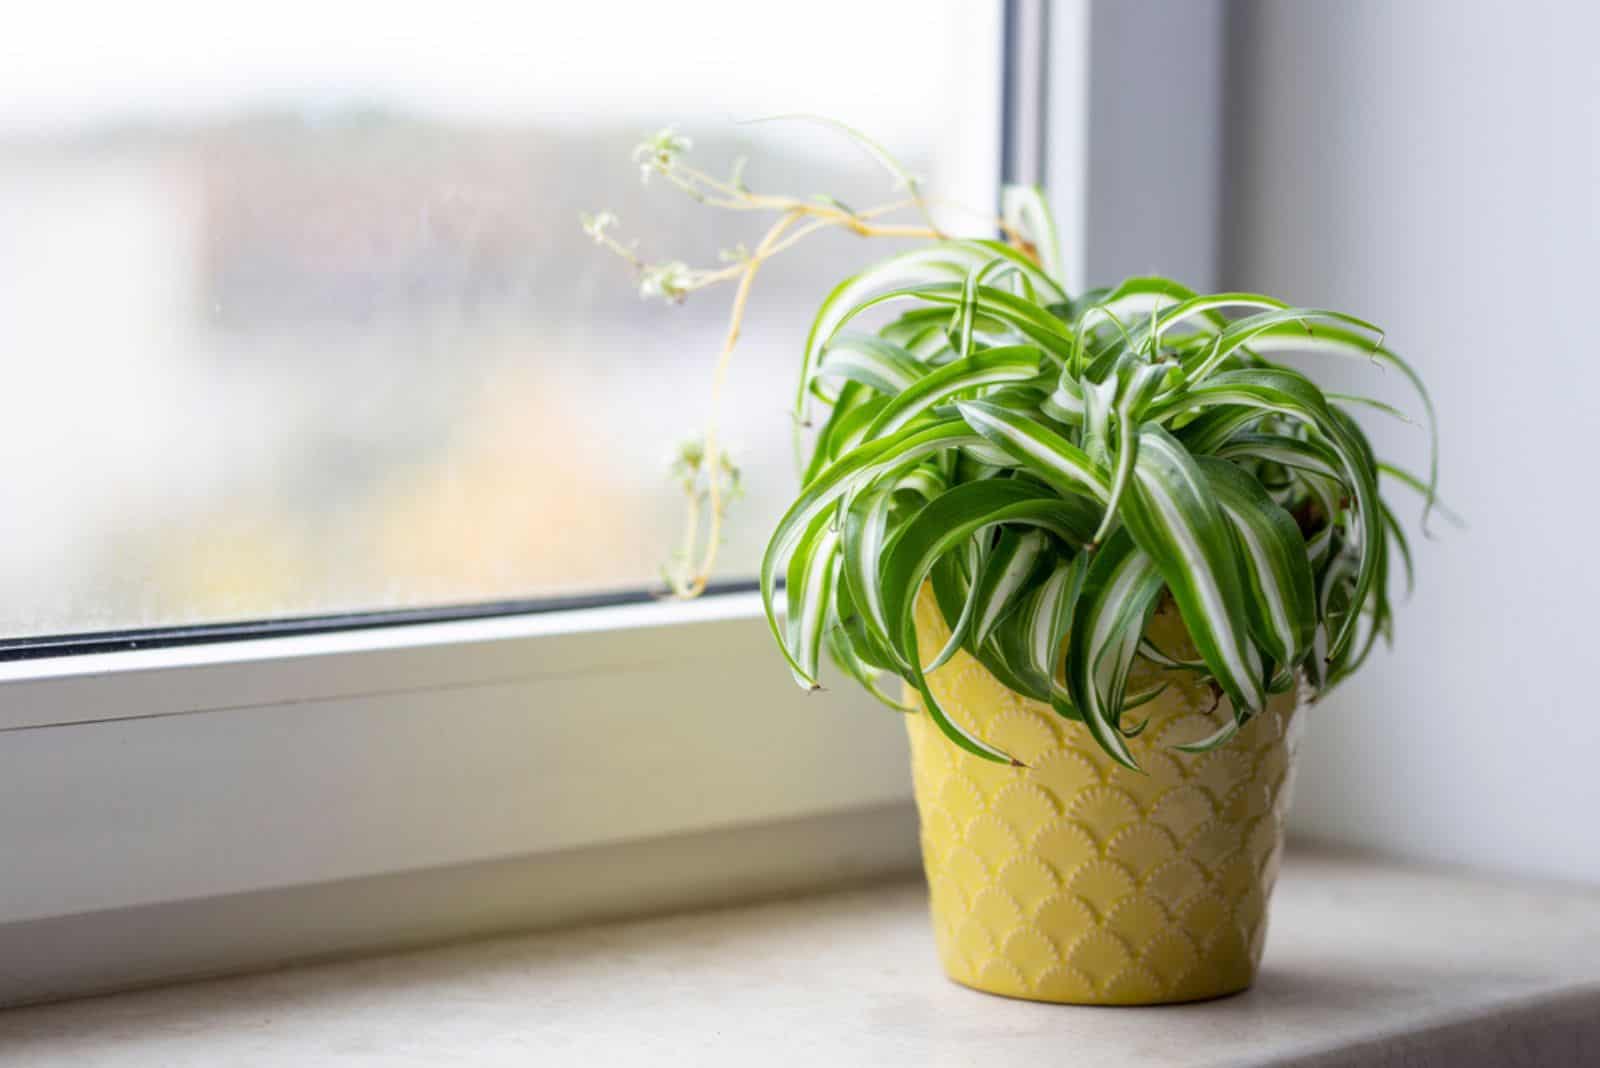 _Spider Plant on a window shell